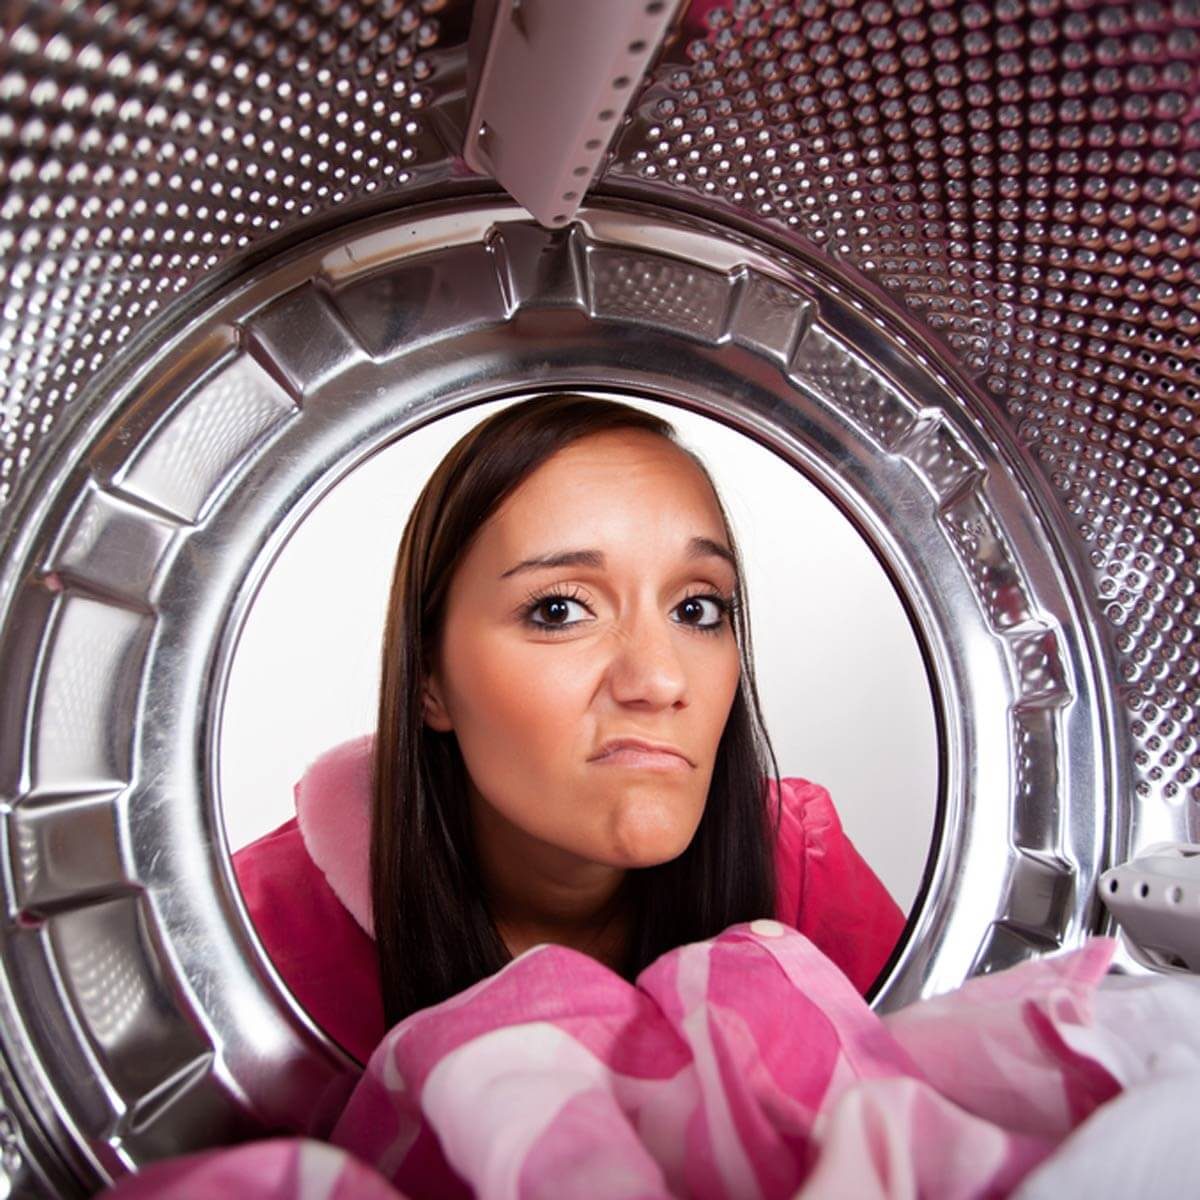 13 Laundry Tips for Washing Your Clothes — The Family Handyman